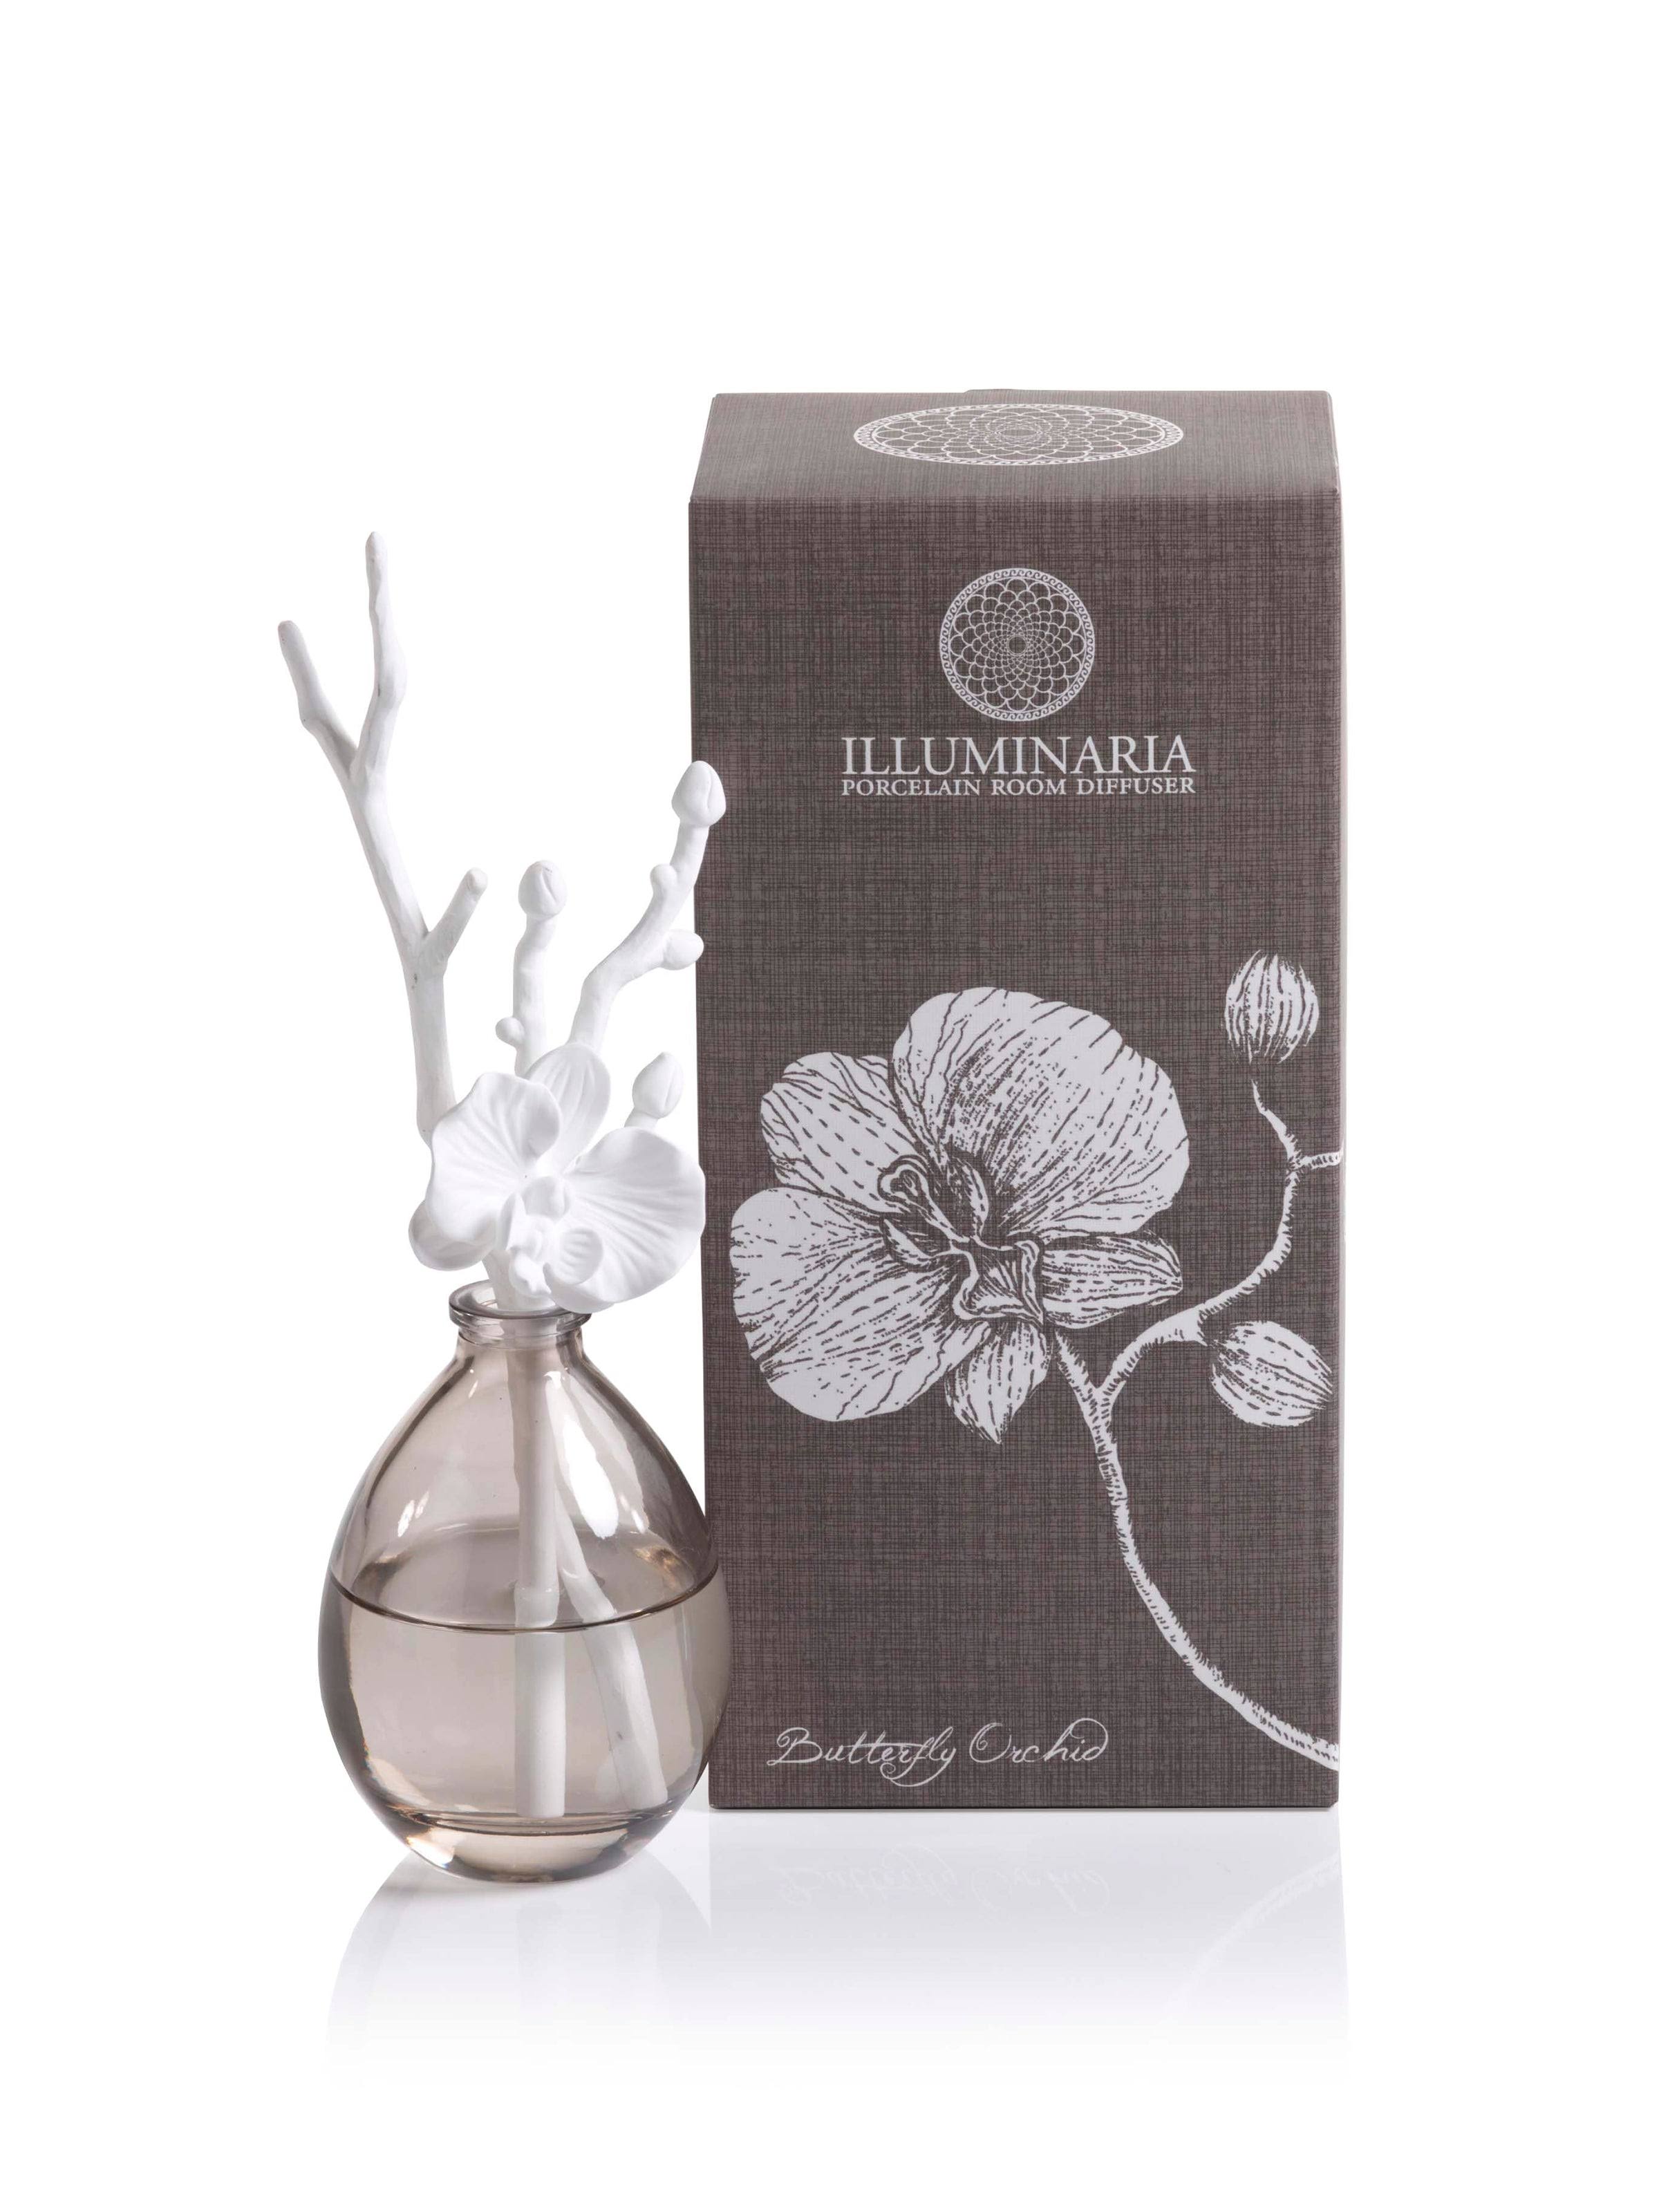 Zodax Illuminaria Porcelain Diffuser - Butterfly Orchid Fragrance